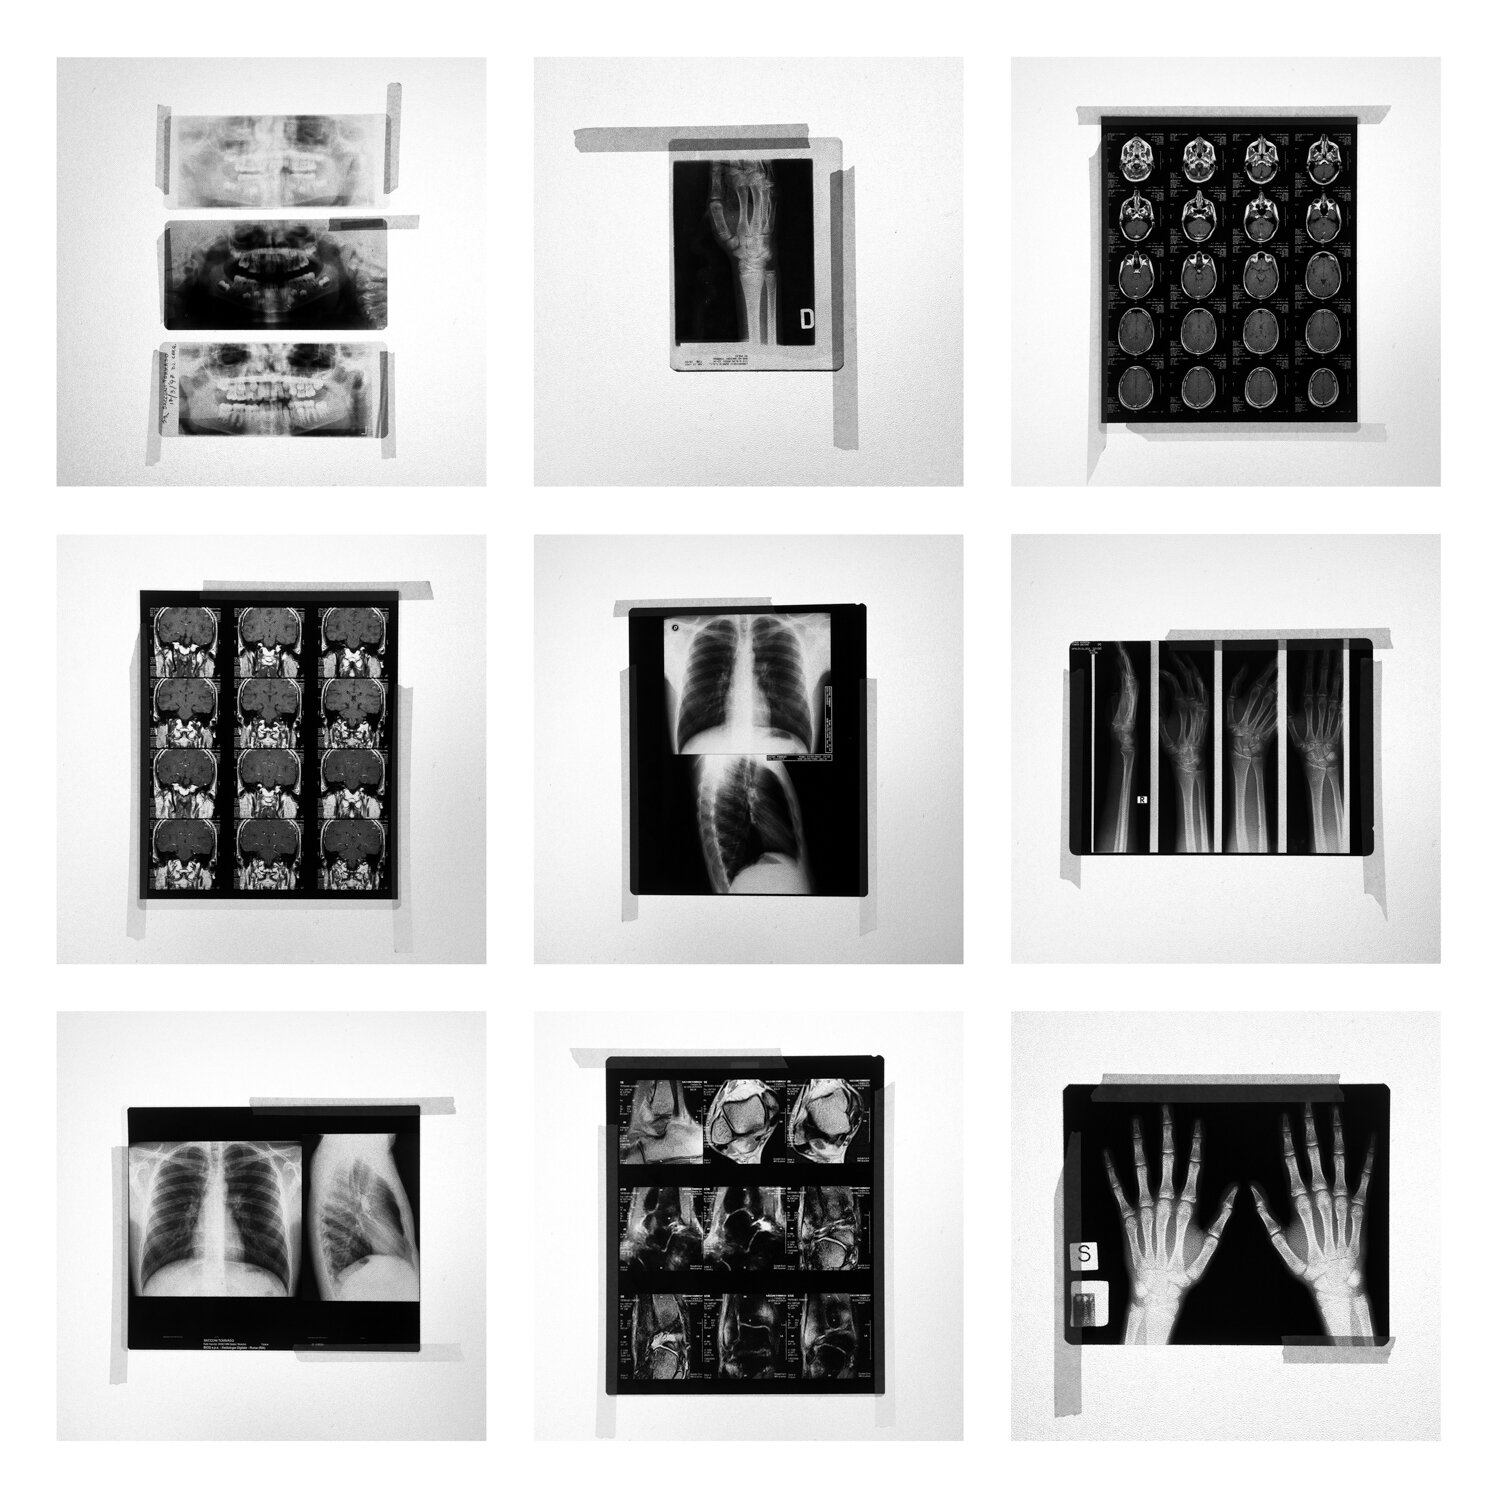       Fragile (a) Collection of my x-ray and MRI 1989 - 2016 Rome / Cairo    Digital files      